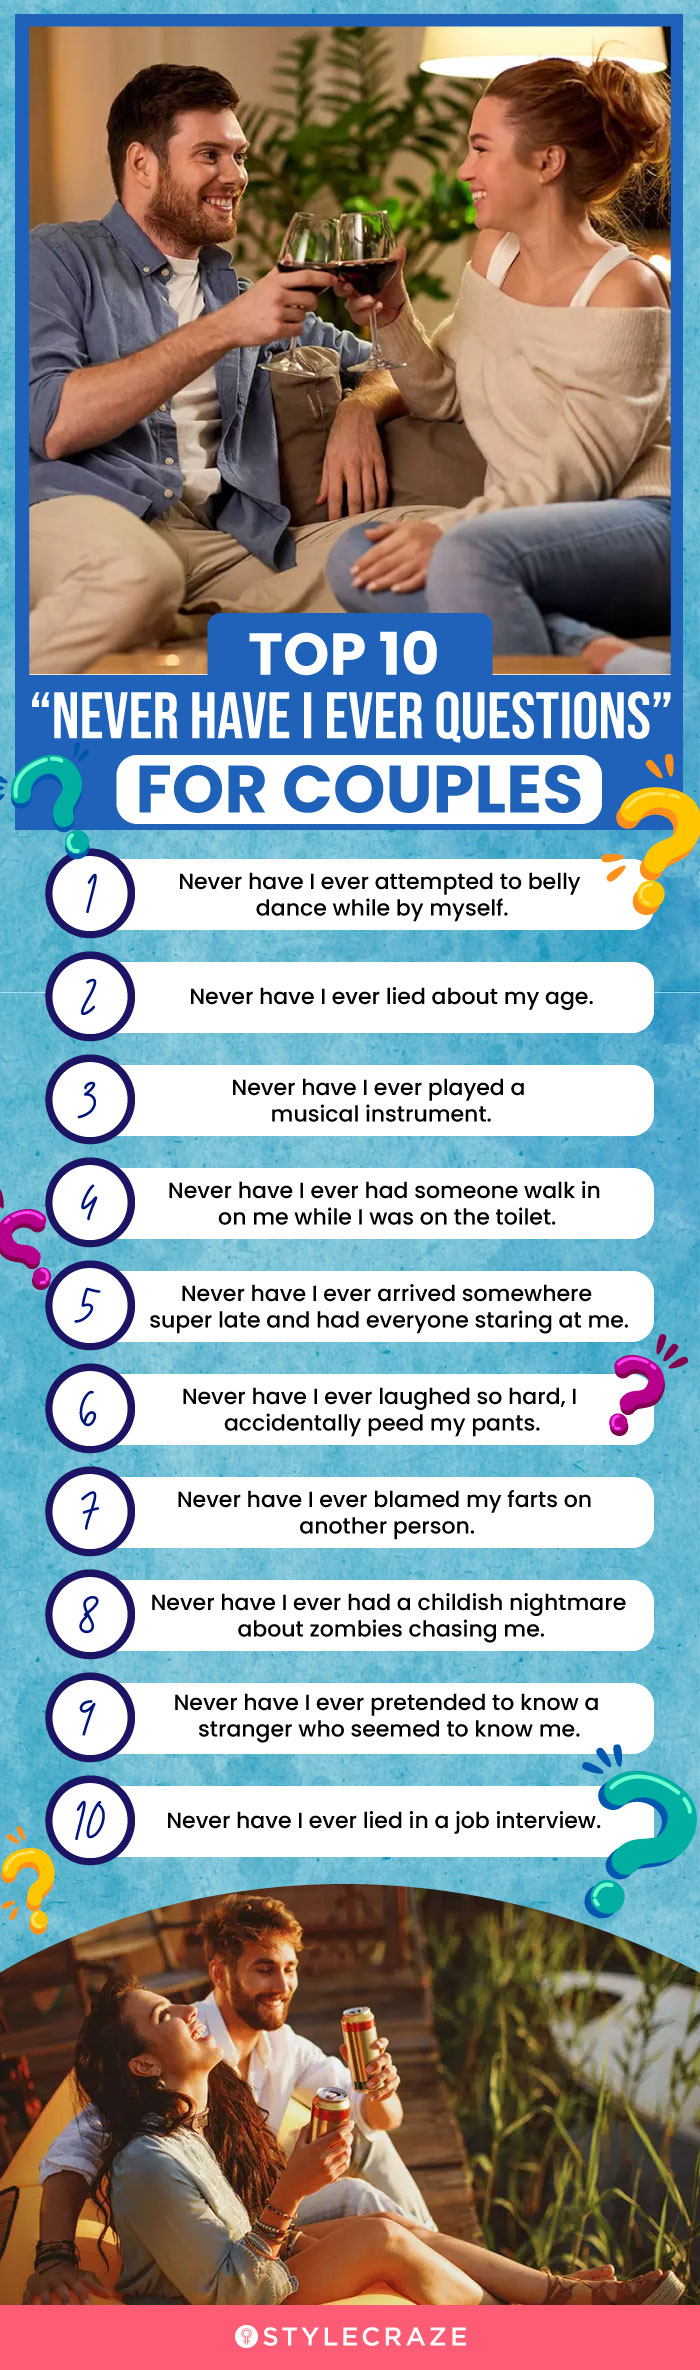 top 10 “never have i ever questions” for couples (infographic)